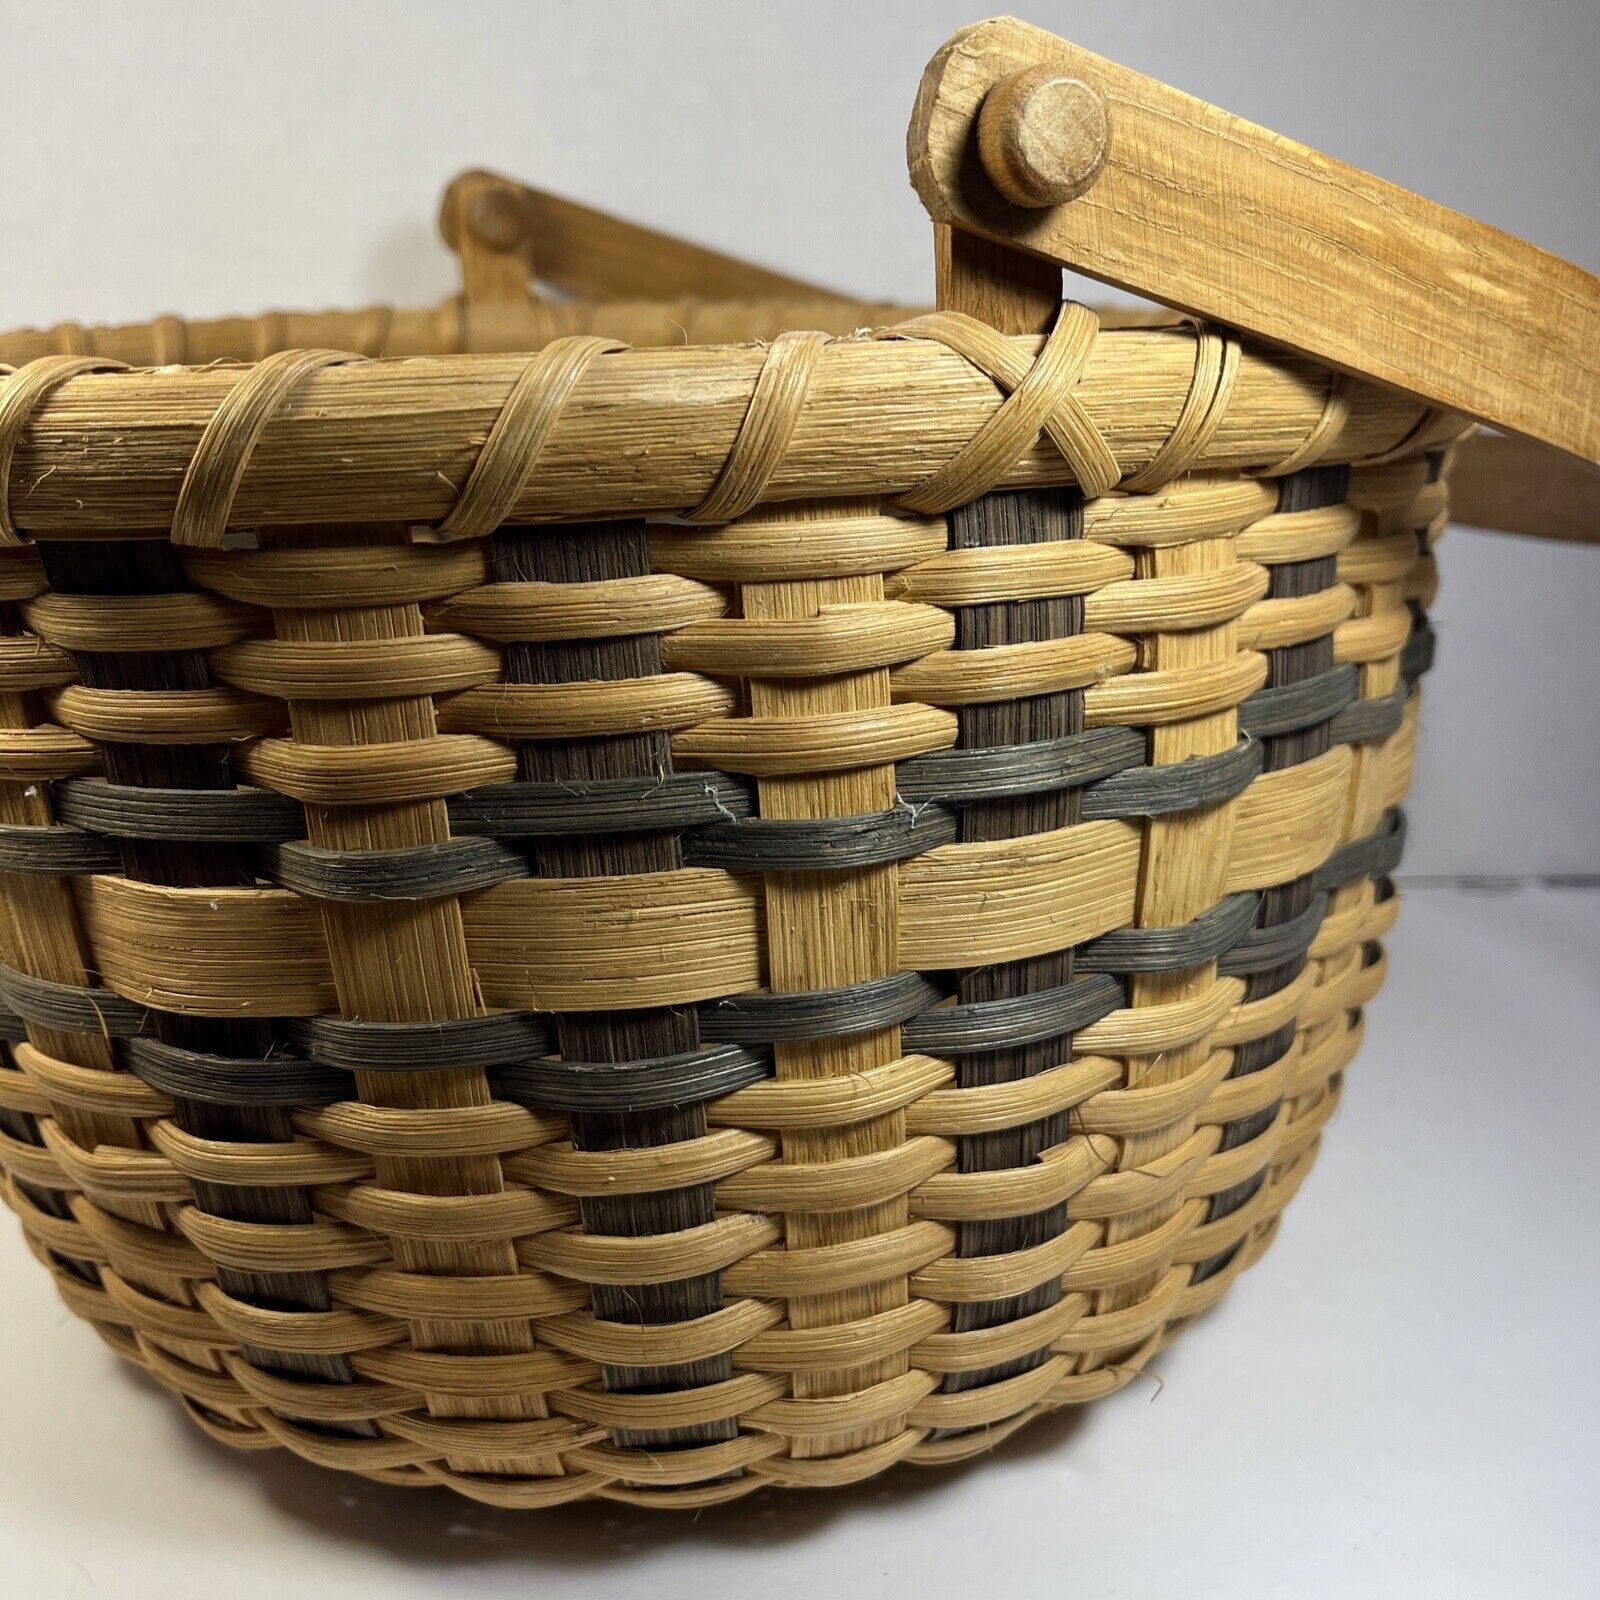 Two Toned Woven Basket Handle Large Weaved Signed Sutton 2002